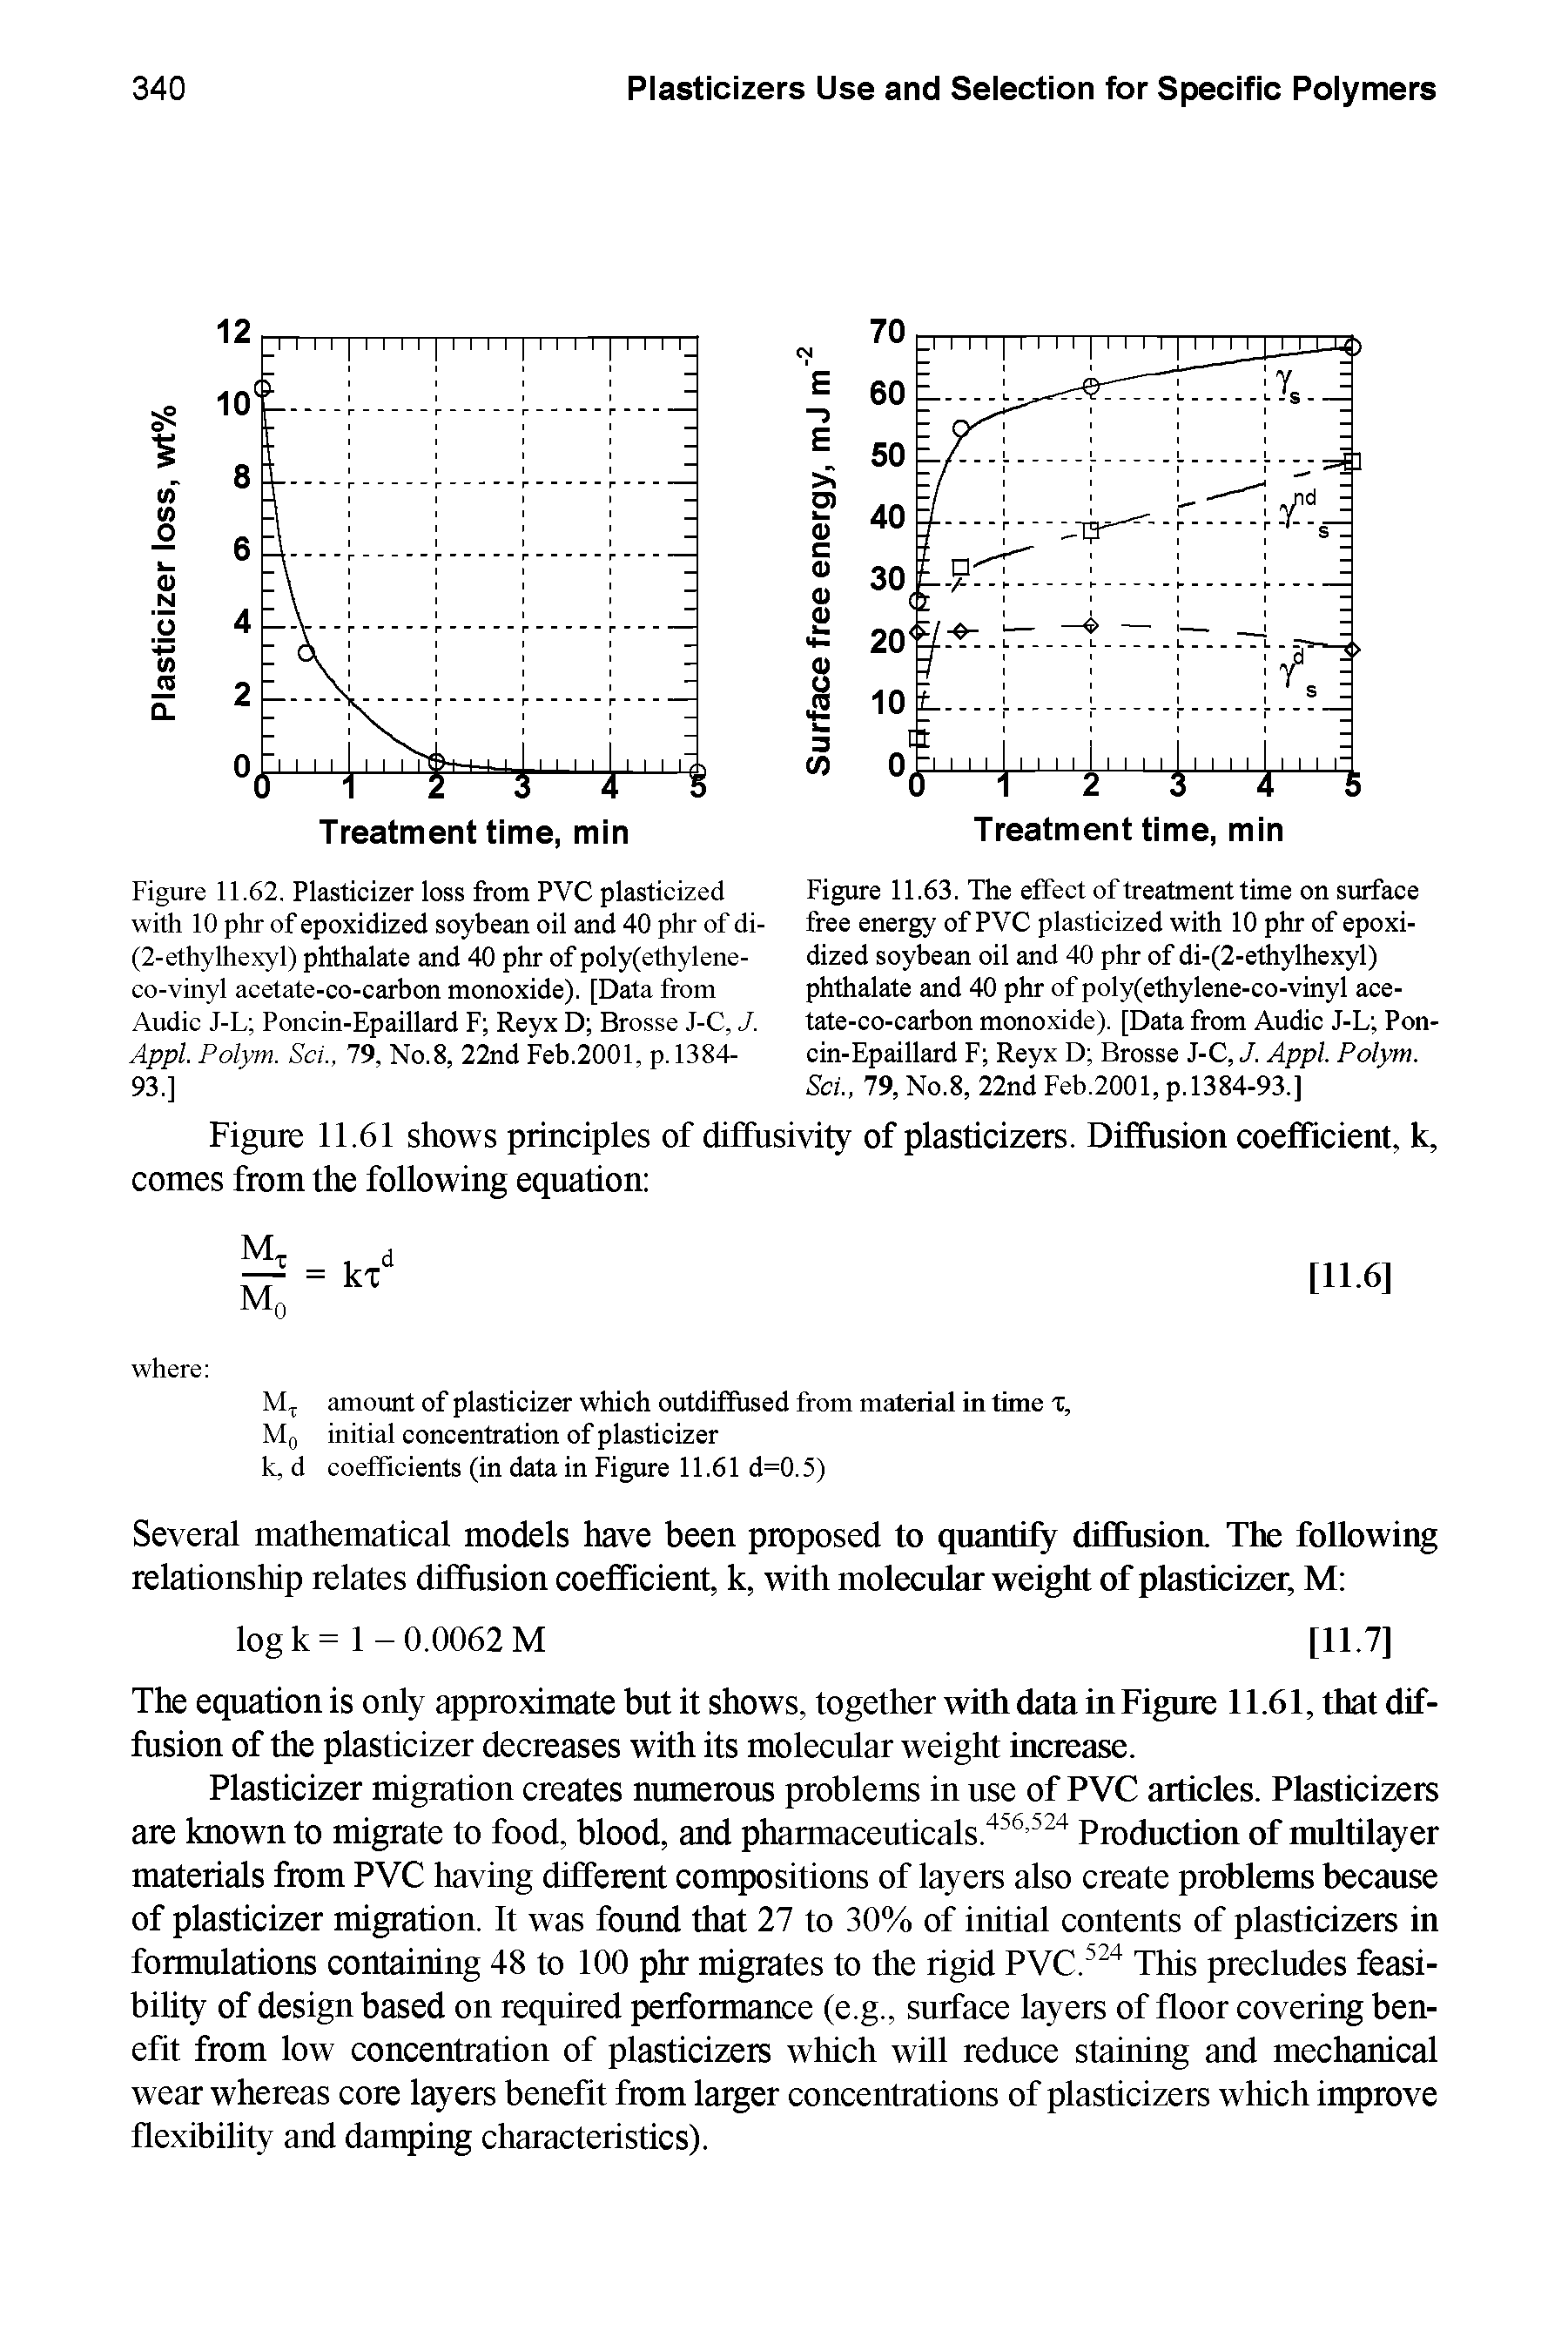 Figure 11.62. Plasticizer loss from PVC plasticized with 10 phr of epoxidized soybean oil and 40 phr of di-(2-ethylhexyl) phthalate and 40 phr of poly(ethylene-co-vinyl acetate-eo-earbon monoxide). [Data from Audic J-L Poncin-Epaillard F Reyx D Brosse J-C, J. Appl. Polym. Sci., 79, No.8, 22nd Feb.2001, p.l384-93.]...